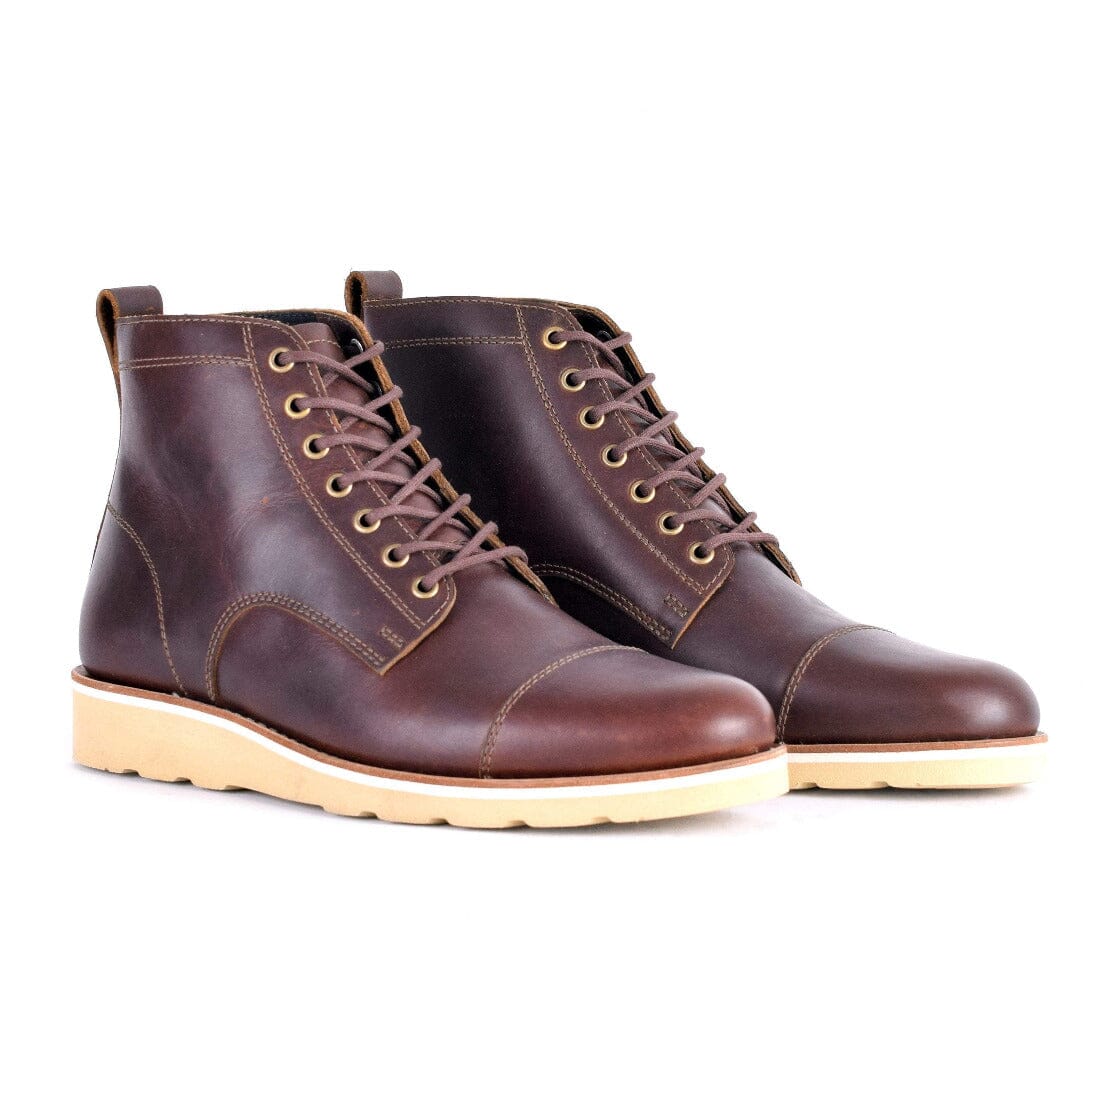 HELM Boots The Lou, Brown